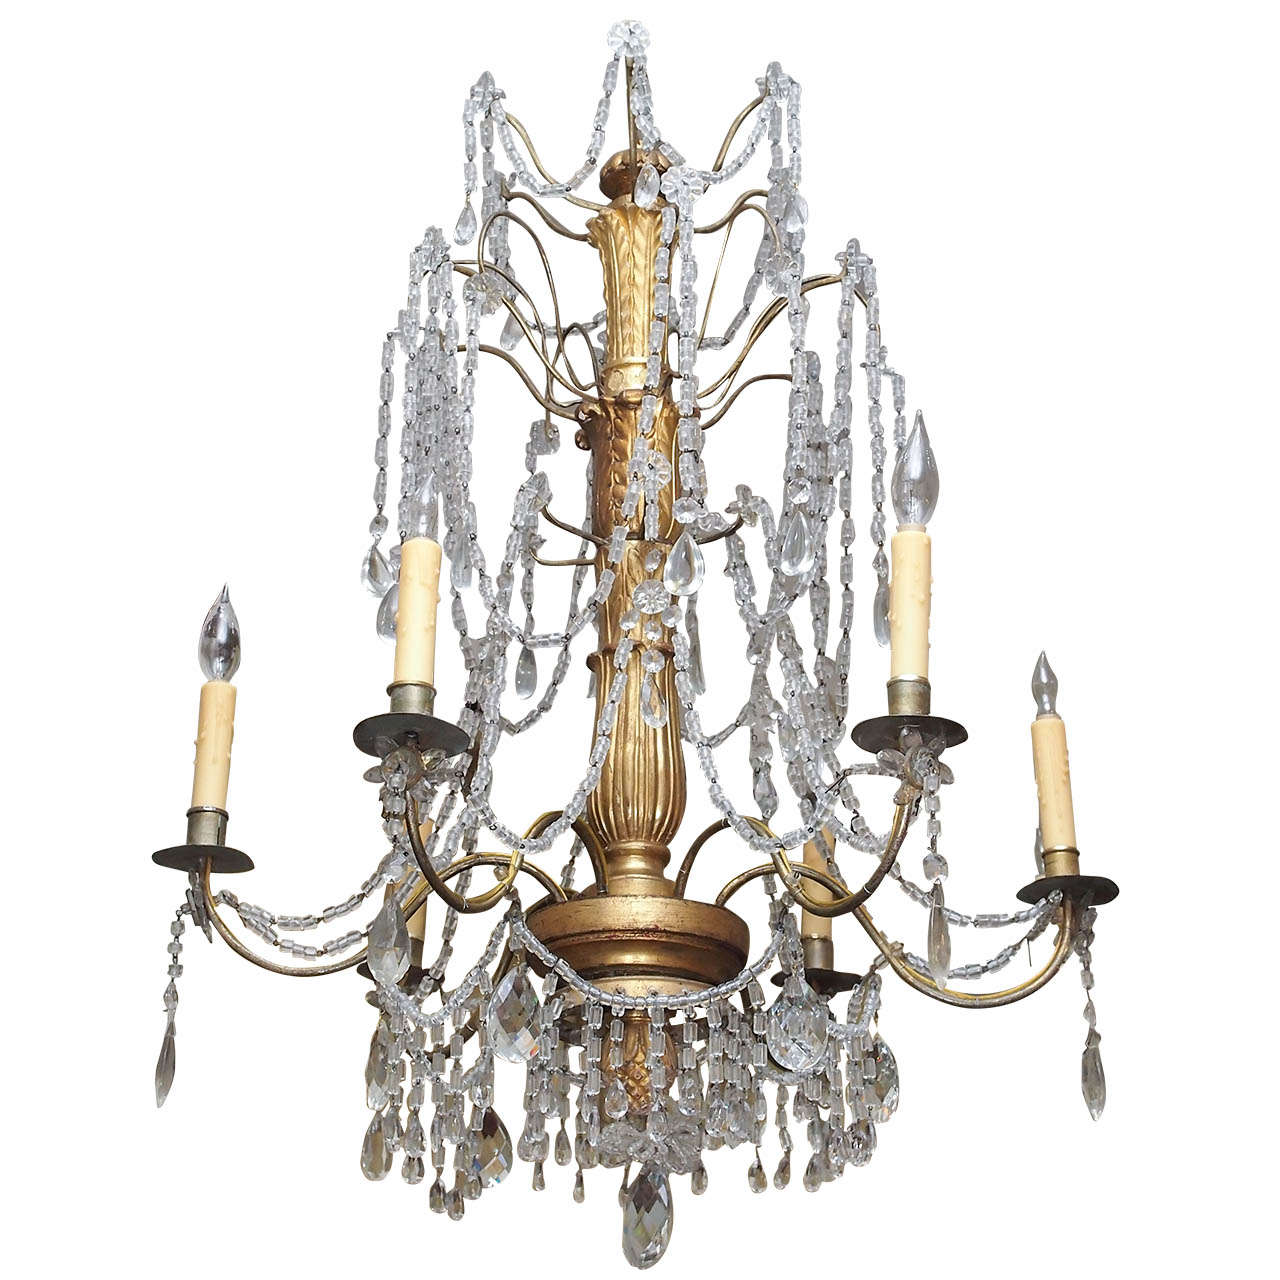 Italian Genovese Chandelier with Gilt Iron Arms And Wood Stem